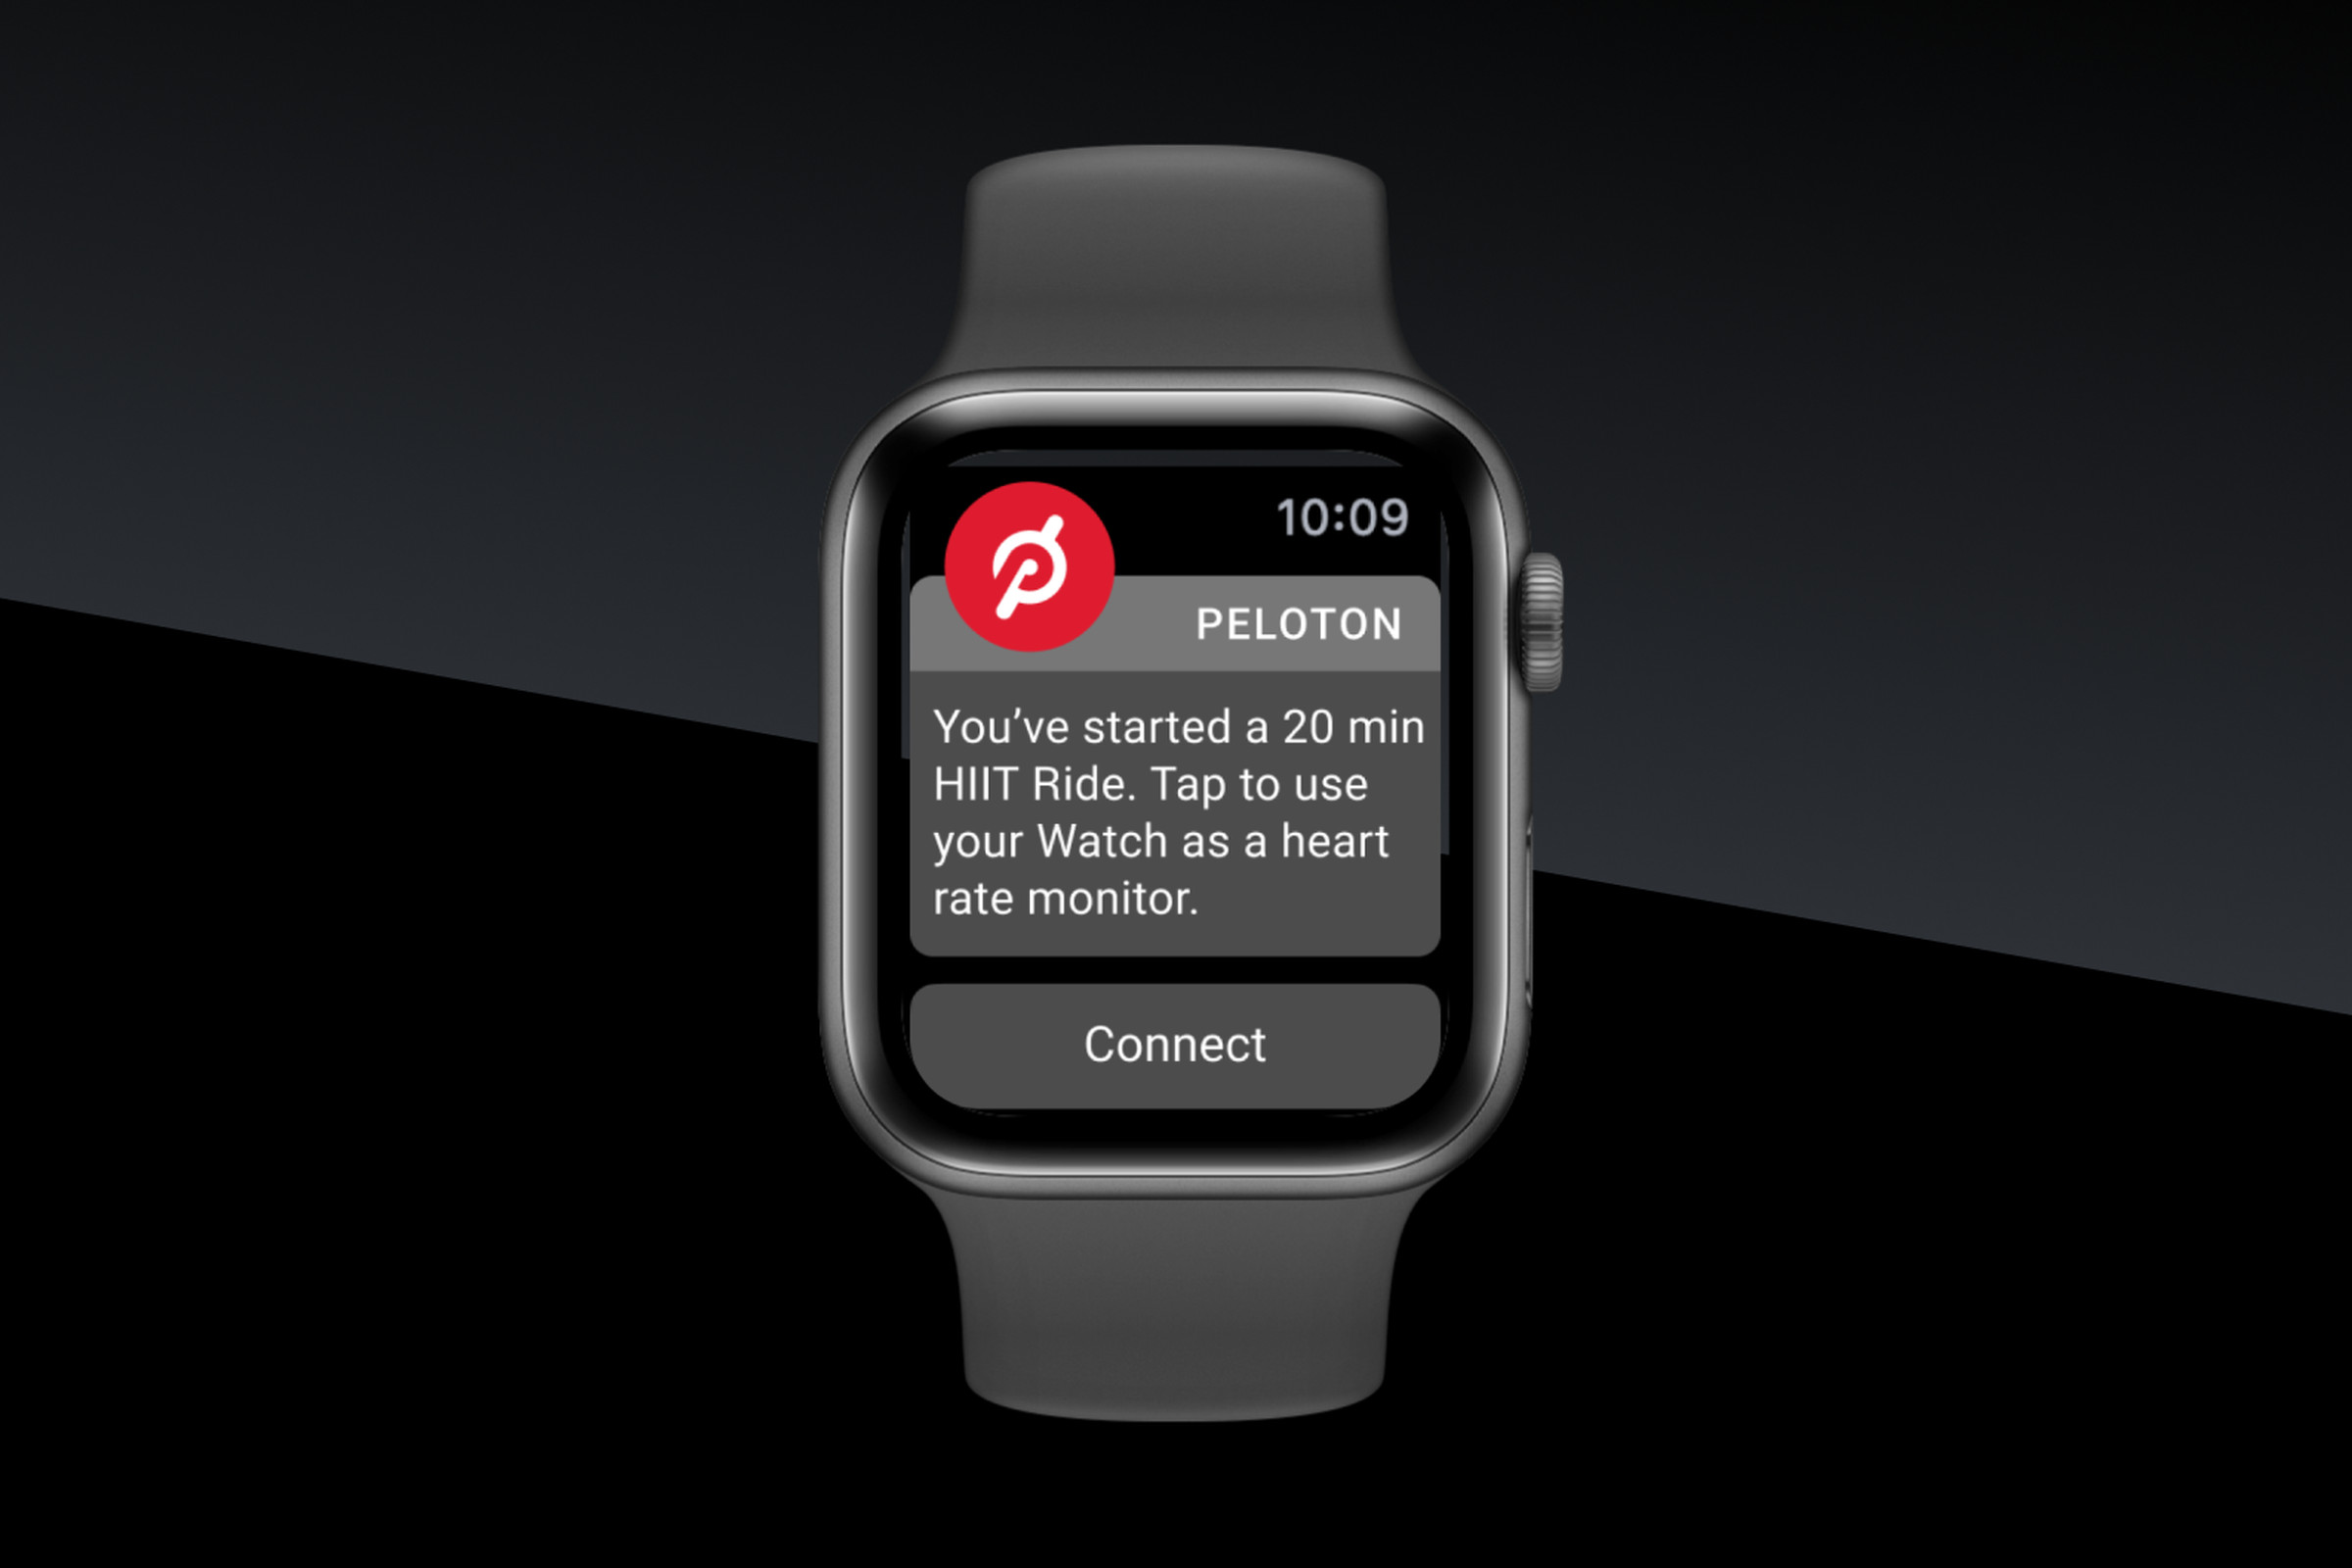 The Apple Watch can now track workouts on any Peloton machine.